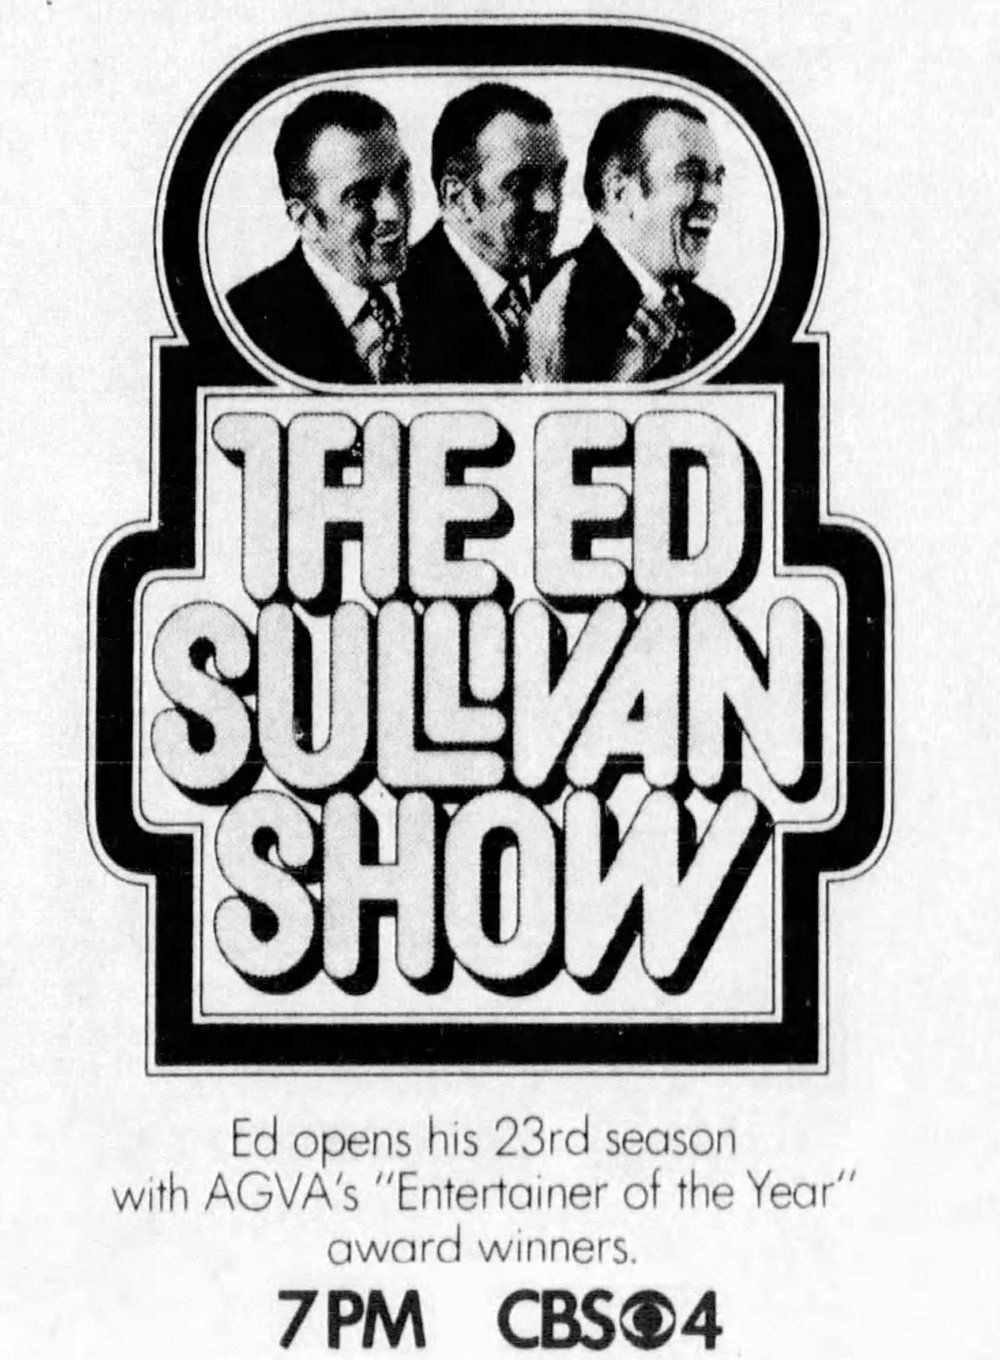 Newspaper ad for this 1970 Ed Sullivan Show.